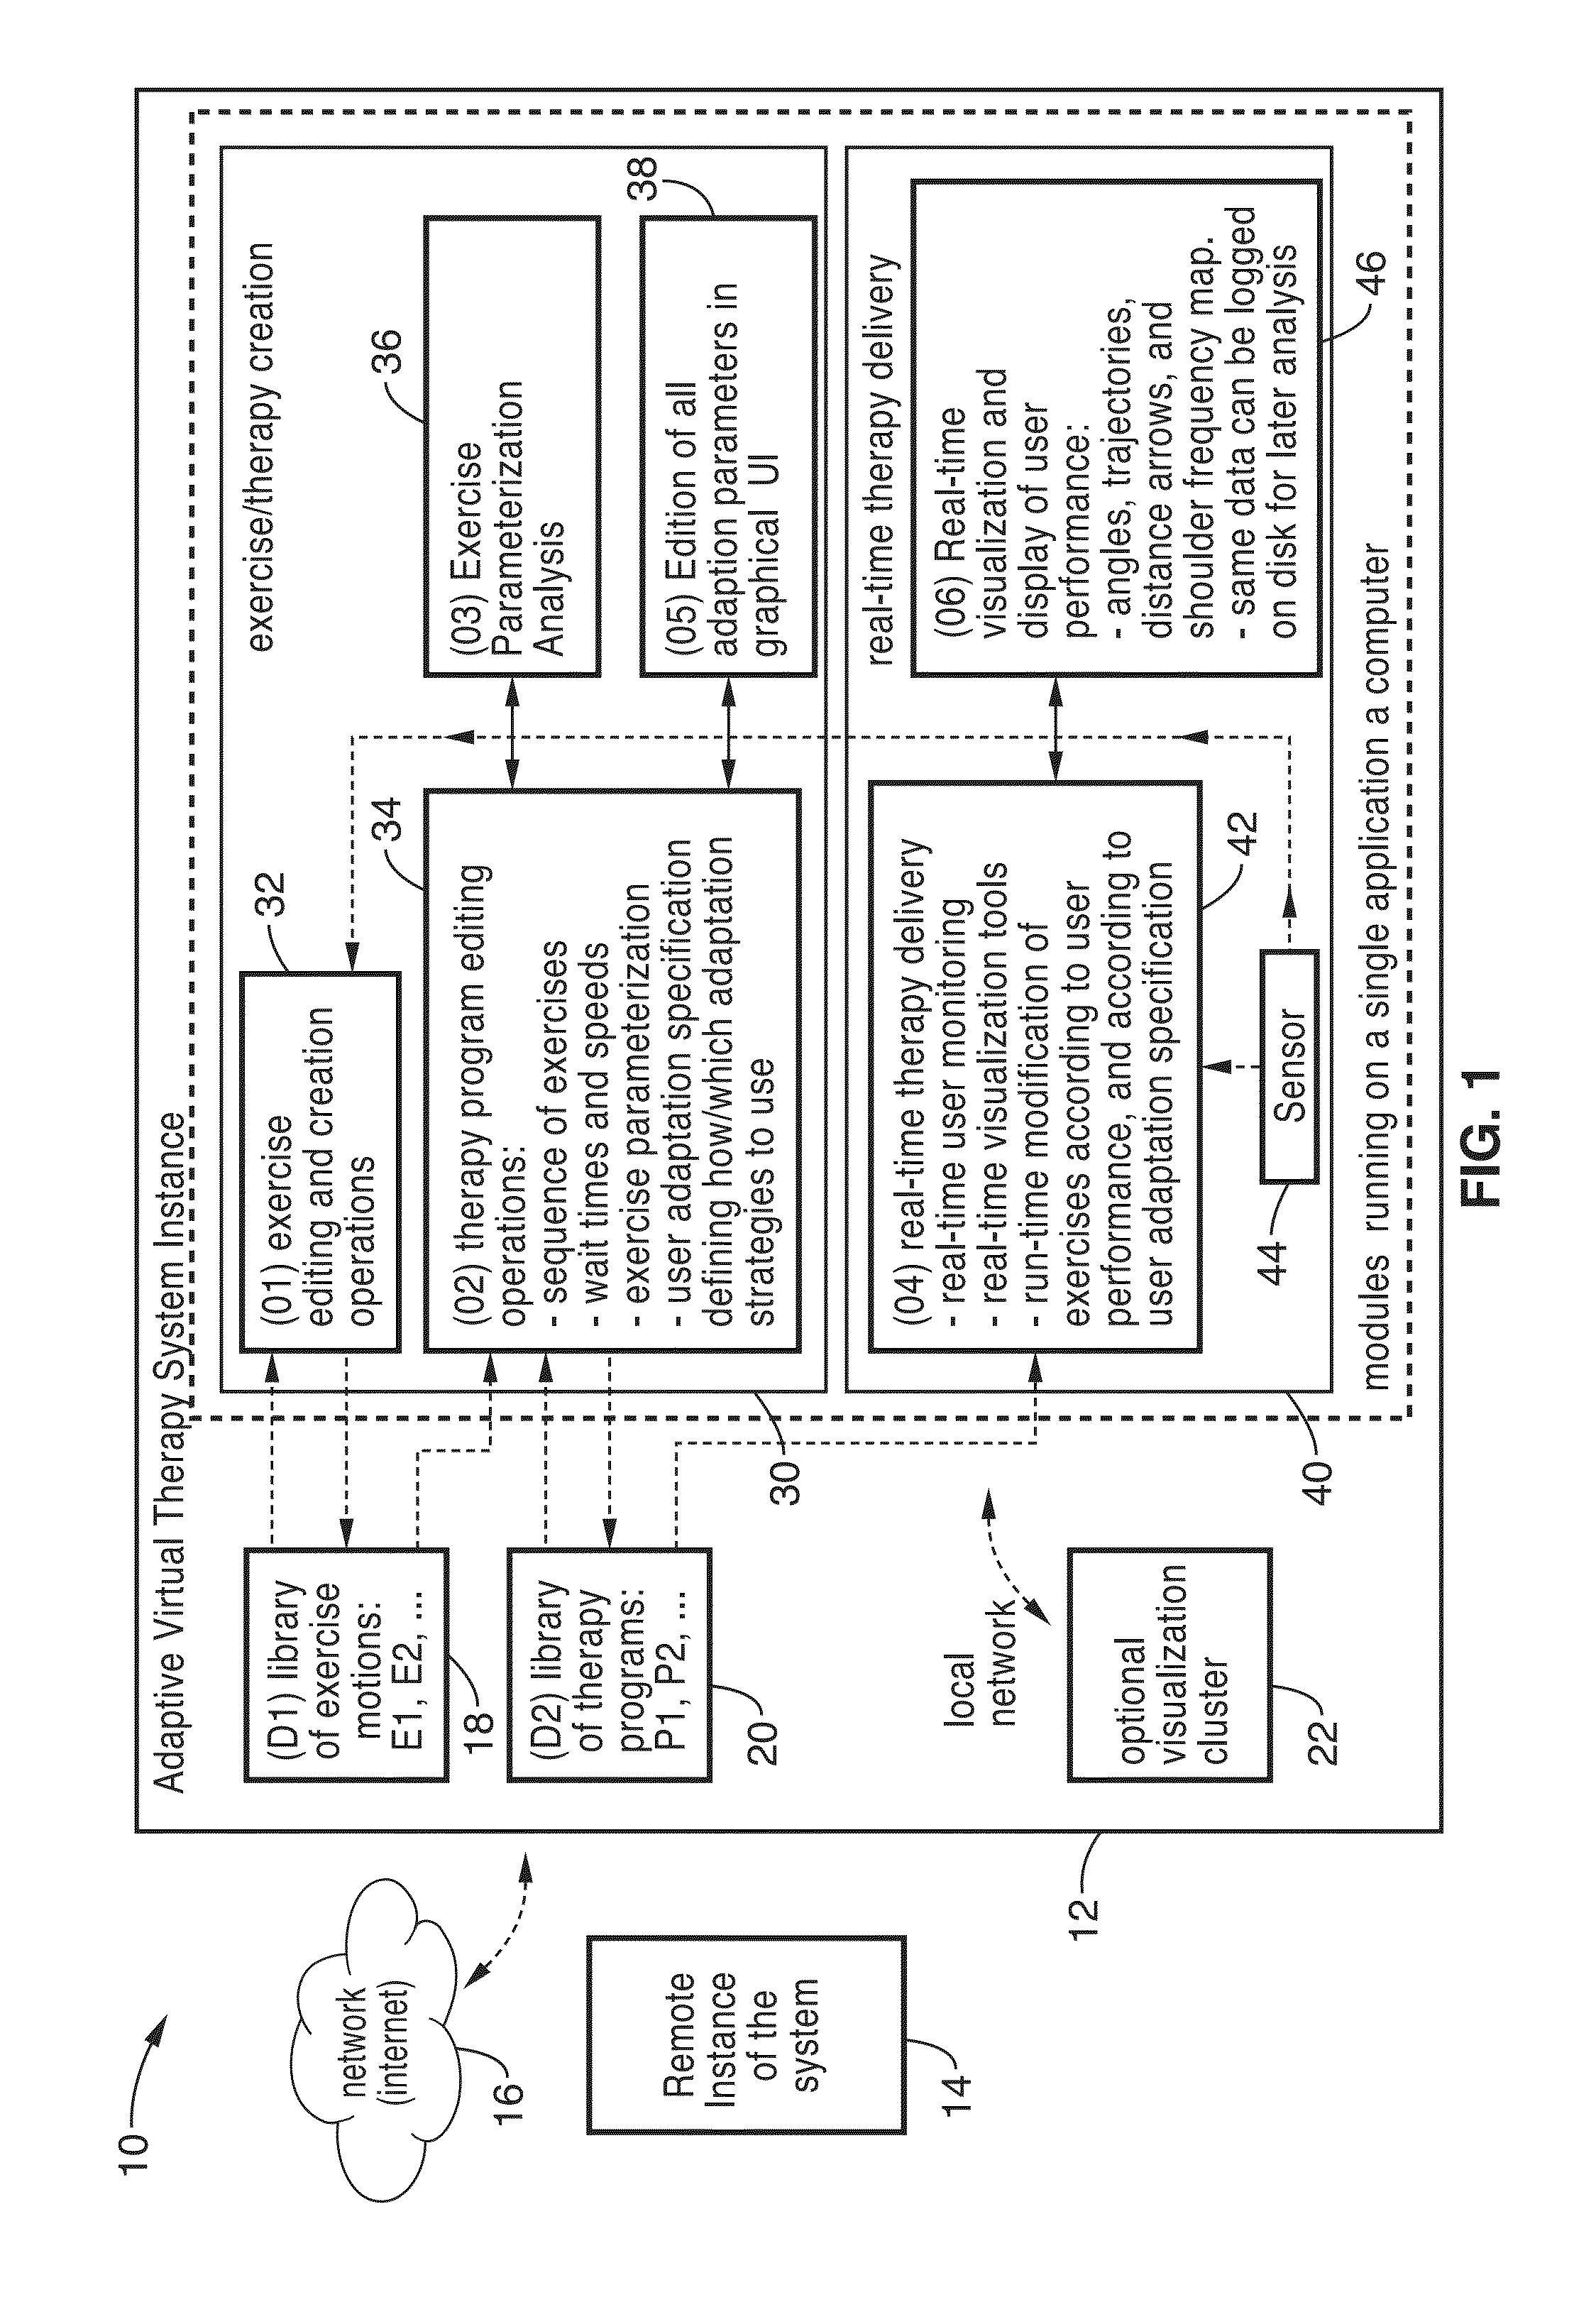 Systems and methods for real-time adaptive therapy and rehabilitation